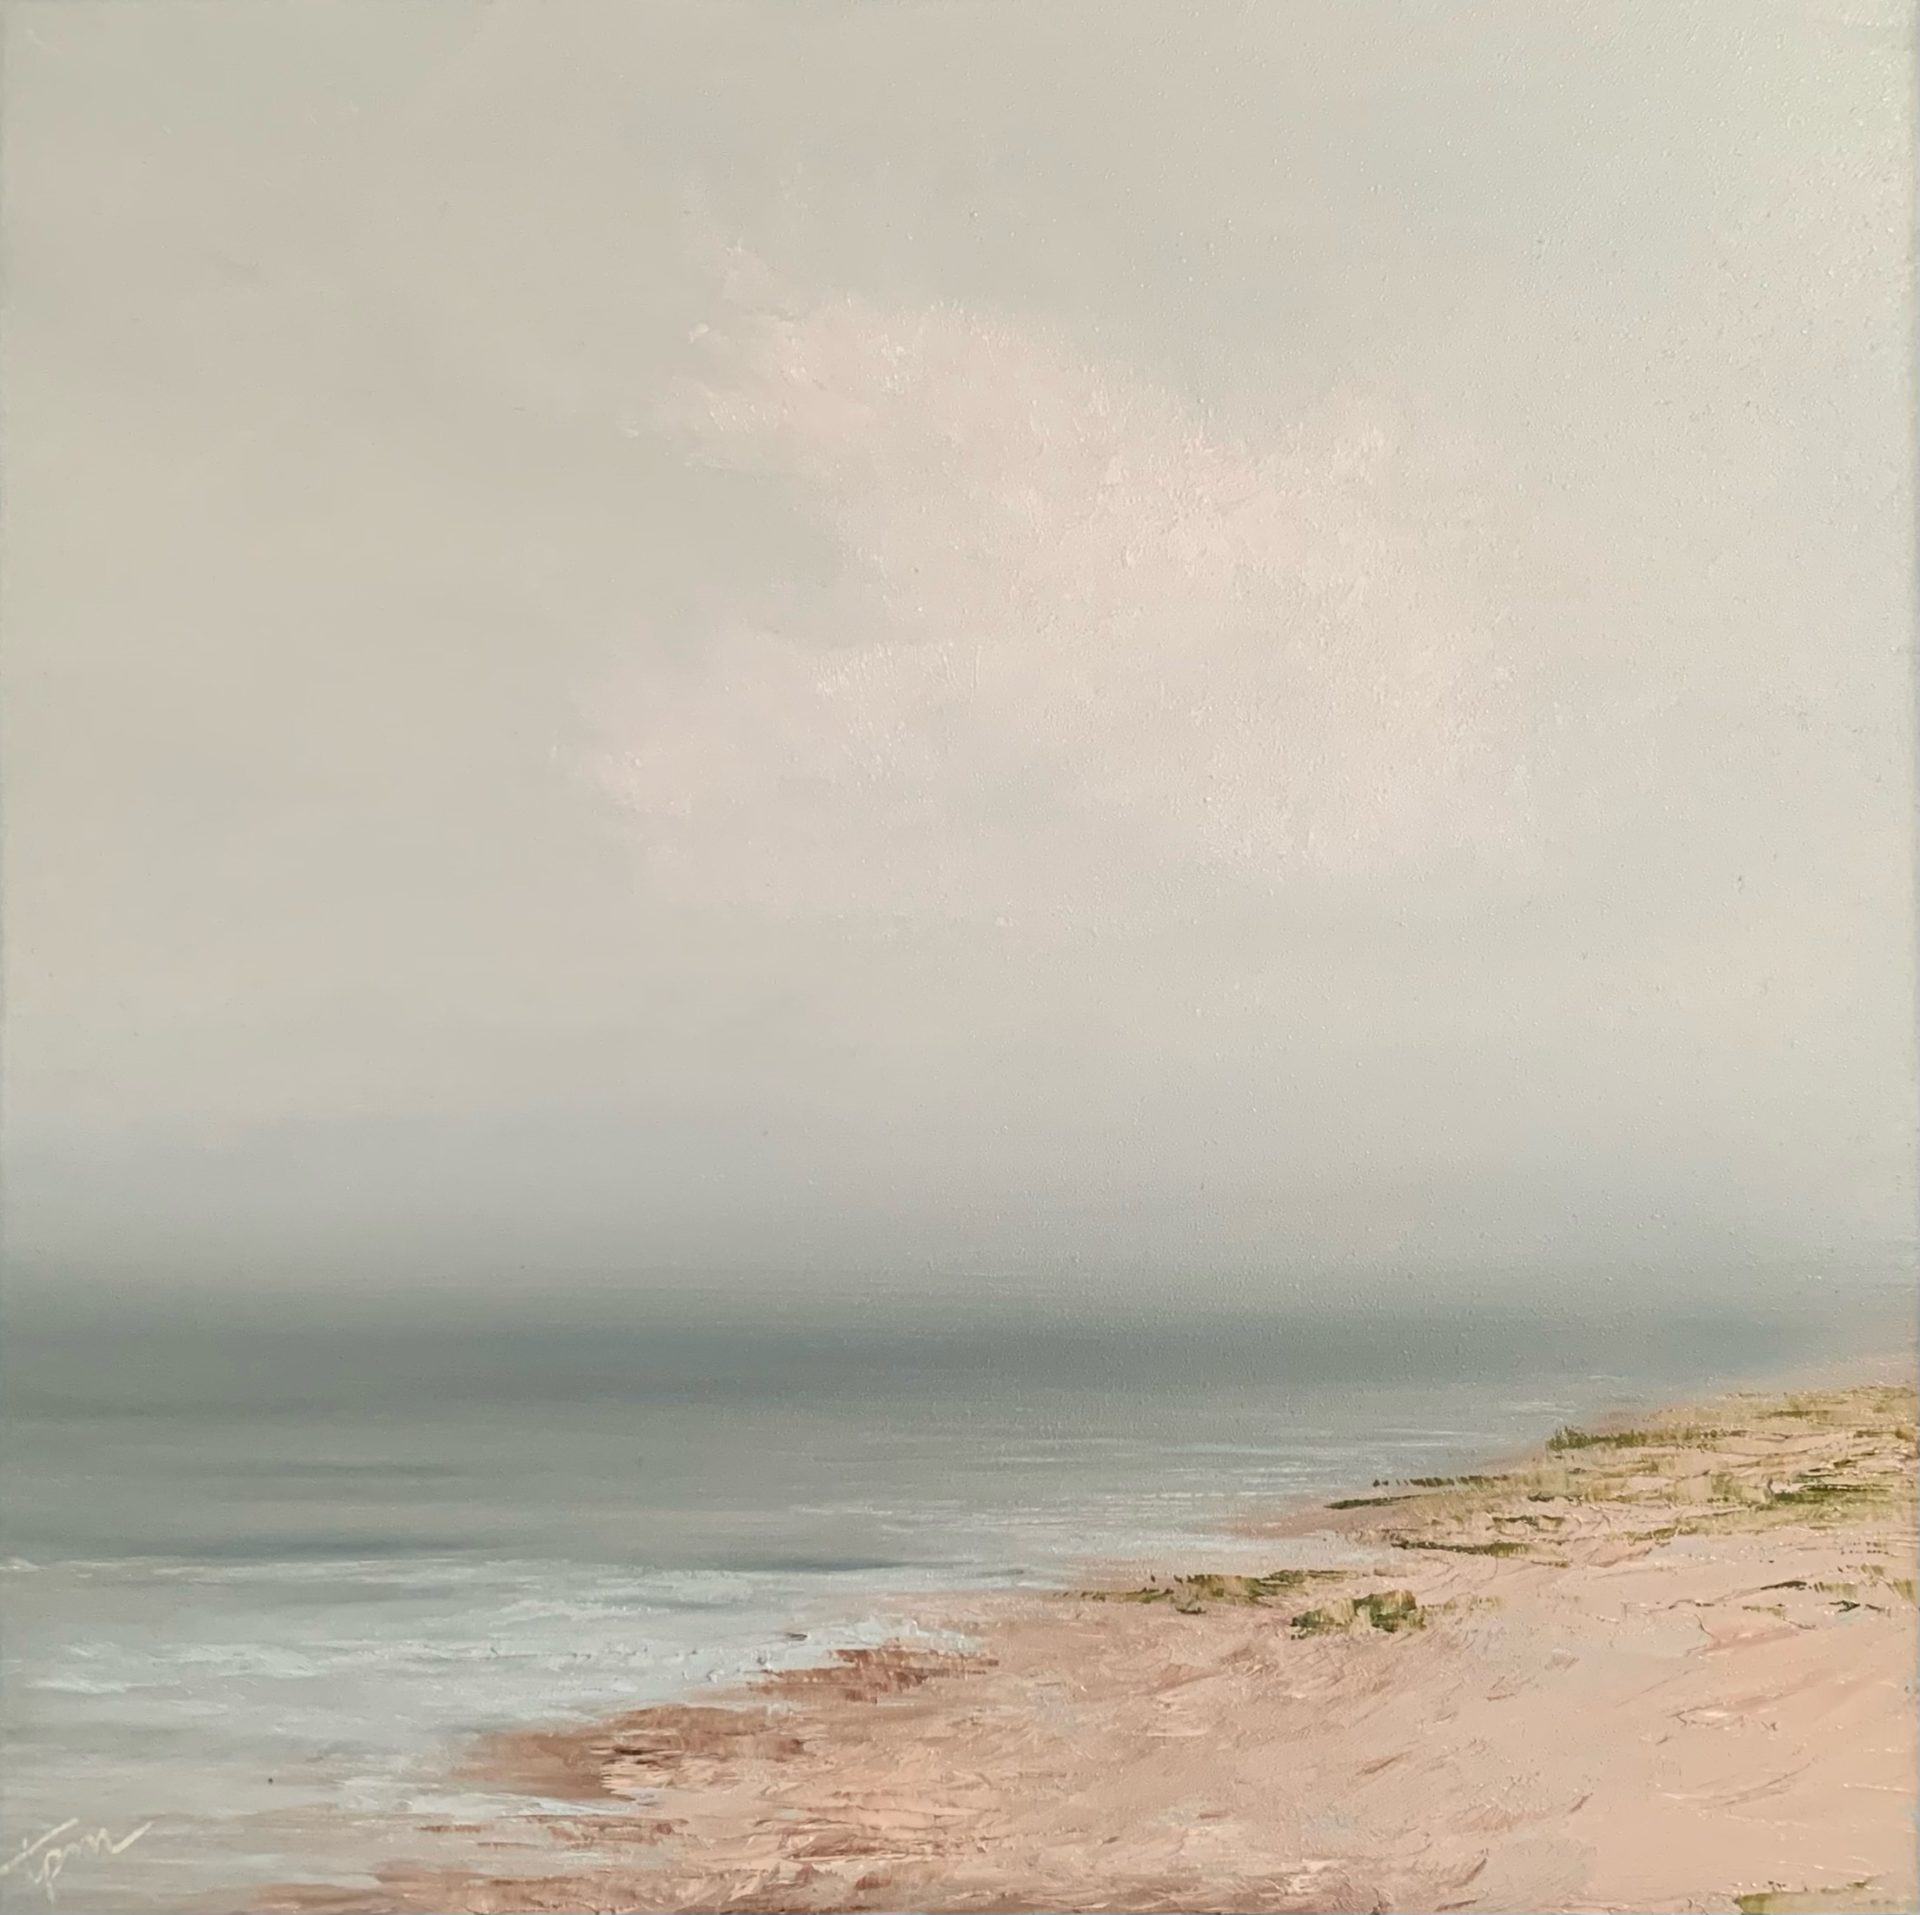 Original seascape oil painting by Tisha Mark, "Peaceful Seaside" 8"x8" oil on Gessobord (2022). Painted in soft beachy tones, there are hints of green sea grass on the sandy shore. The sky is a hazy bluish-gray with a soft white cloud. The sea is calm, it's a peaceful day.